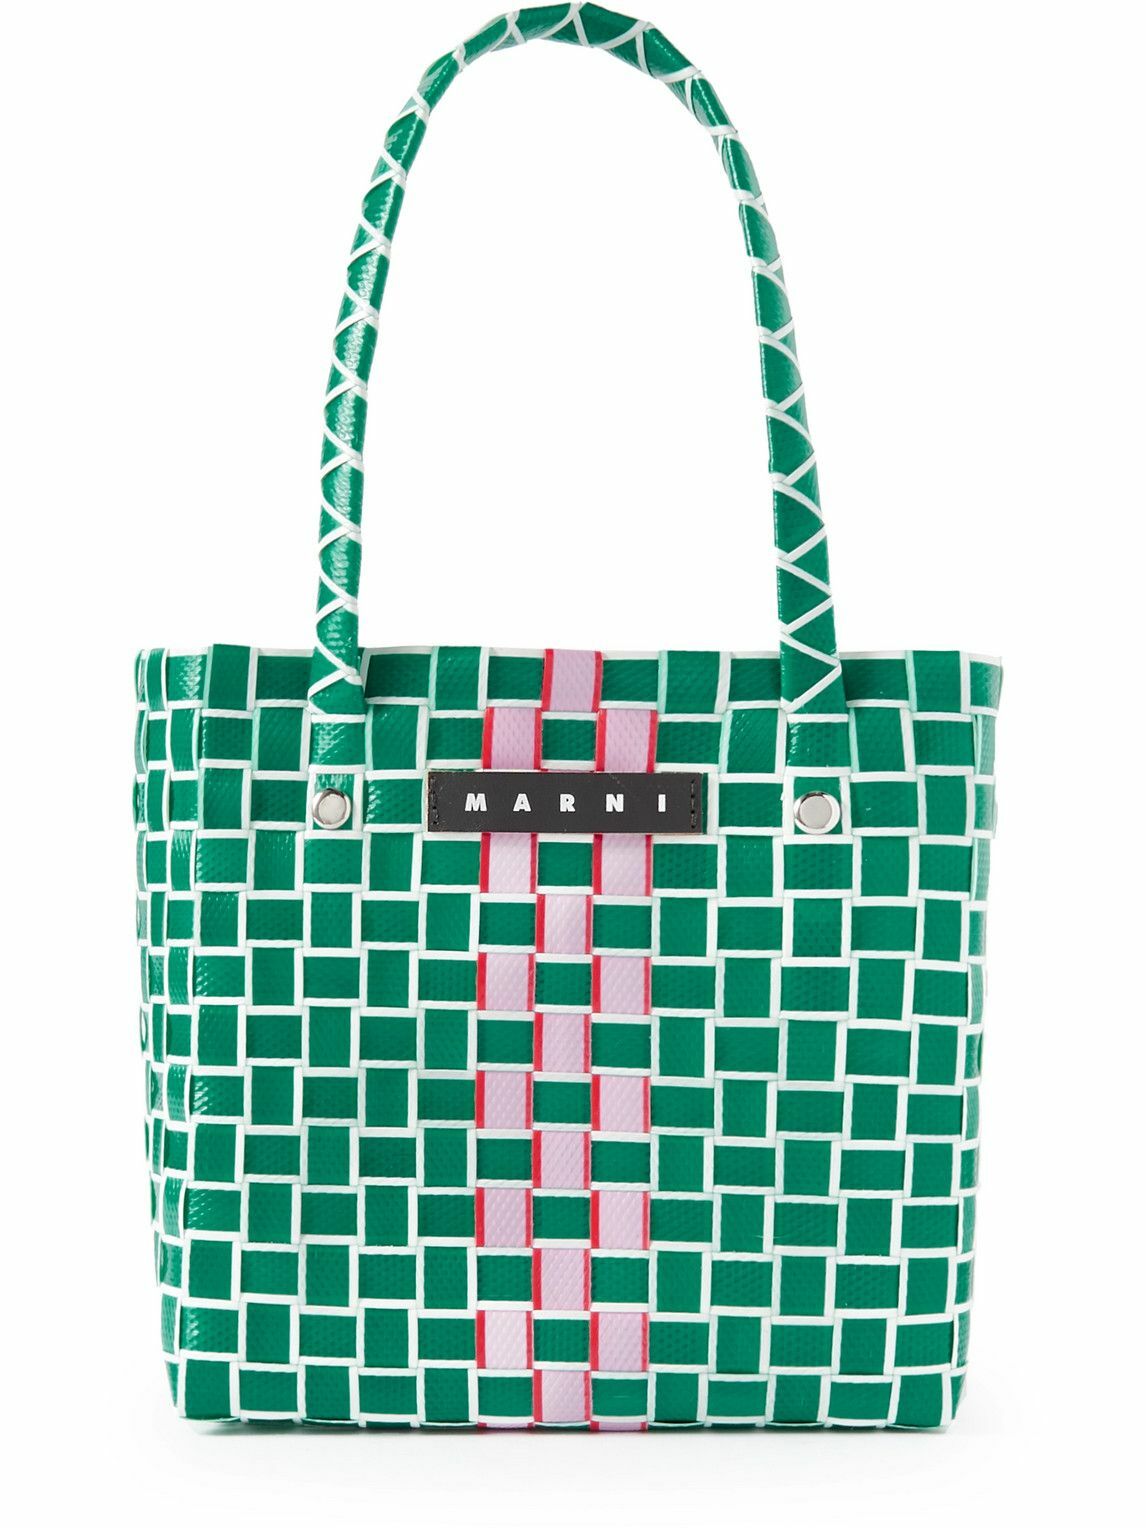 MARNI KIDS - Woven Textured-Leather Tote Bag